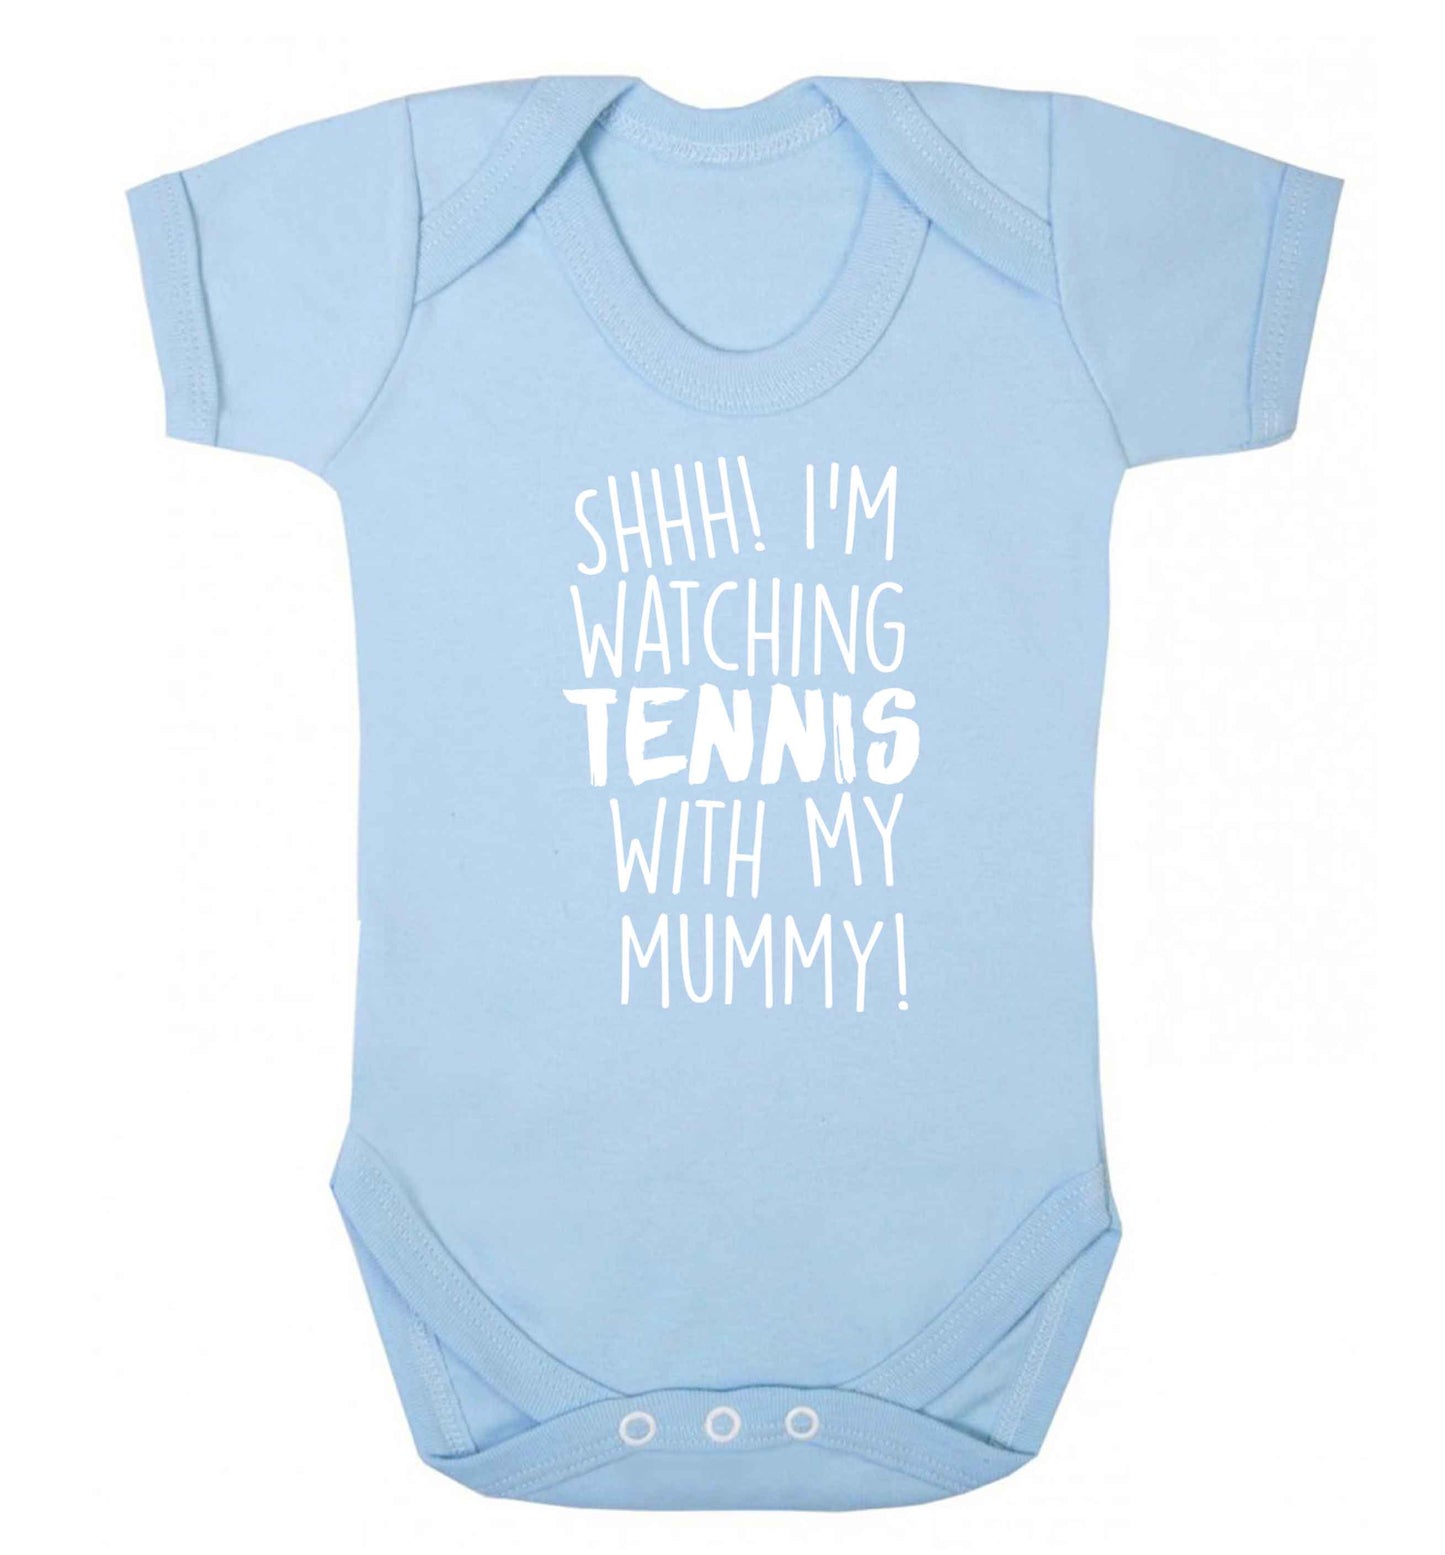 Shh! I'm watching tennis with my mummy! Baby Vest pale blue 18-24 months